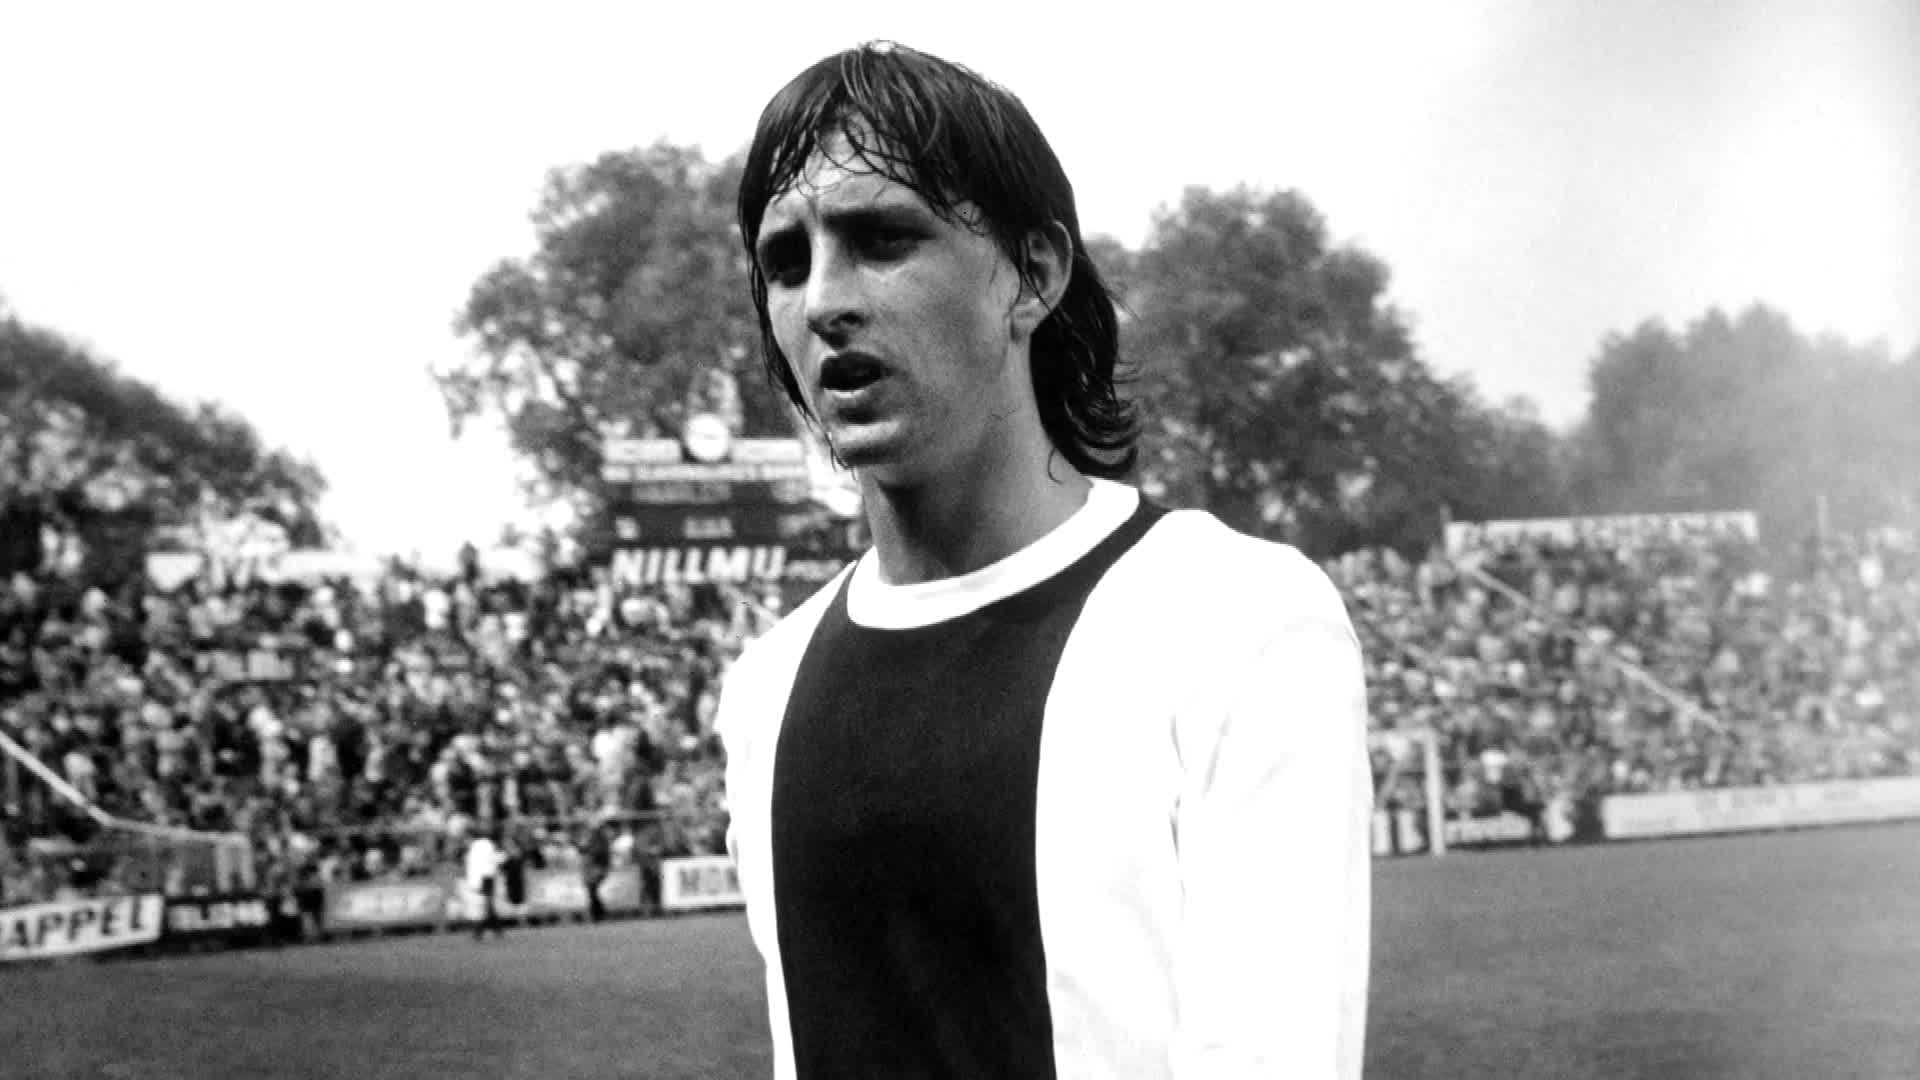 Johan Cruyff: The Barcelona and Netherlands legend in quotes